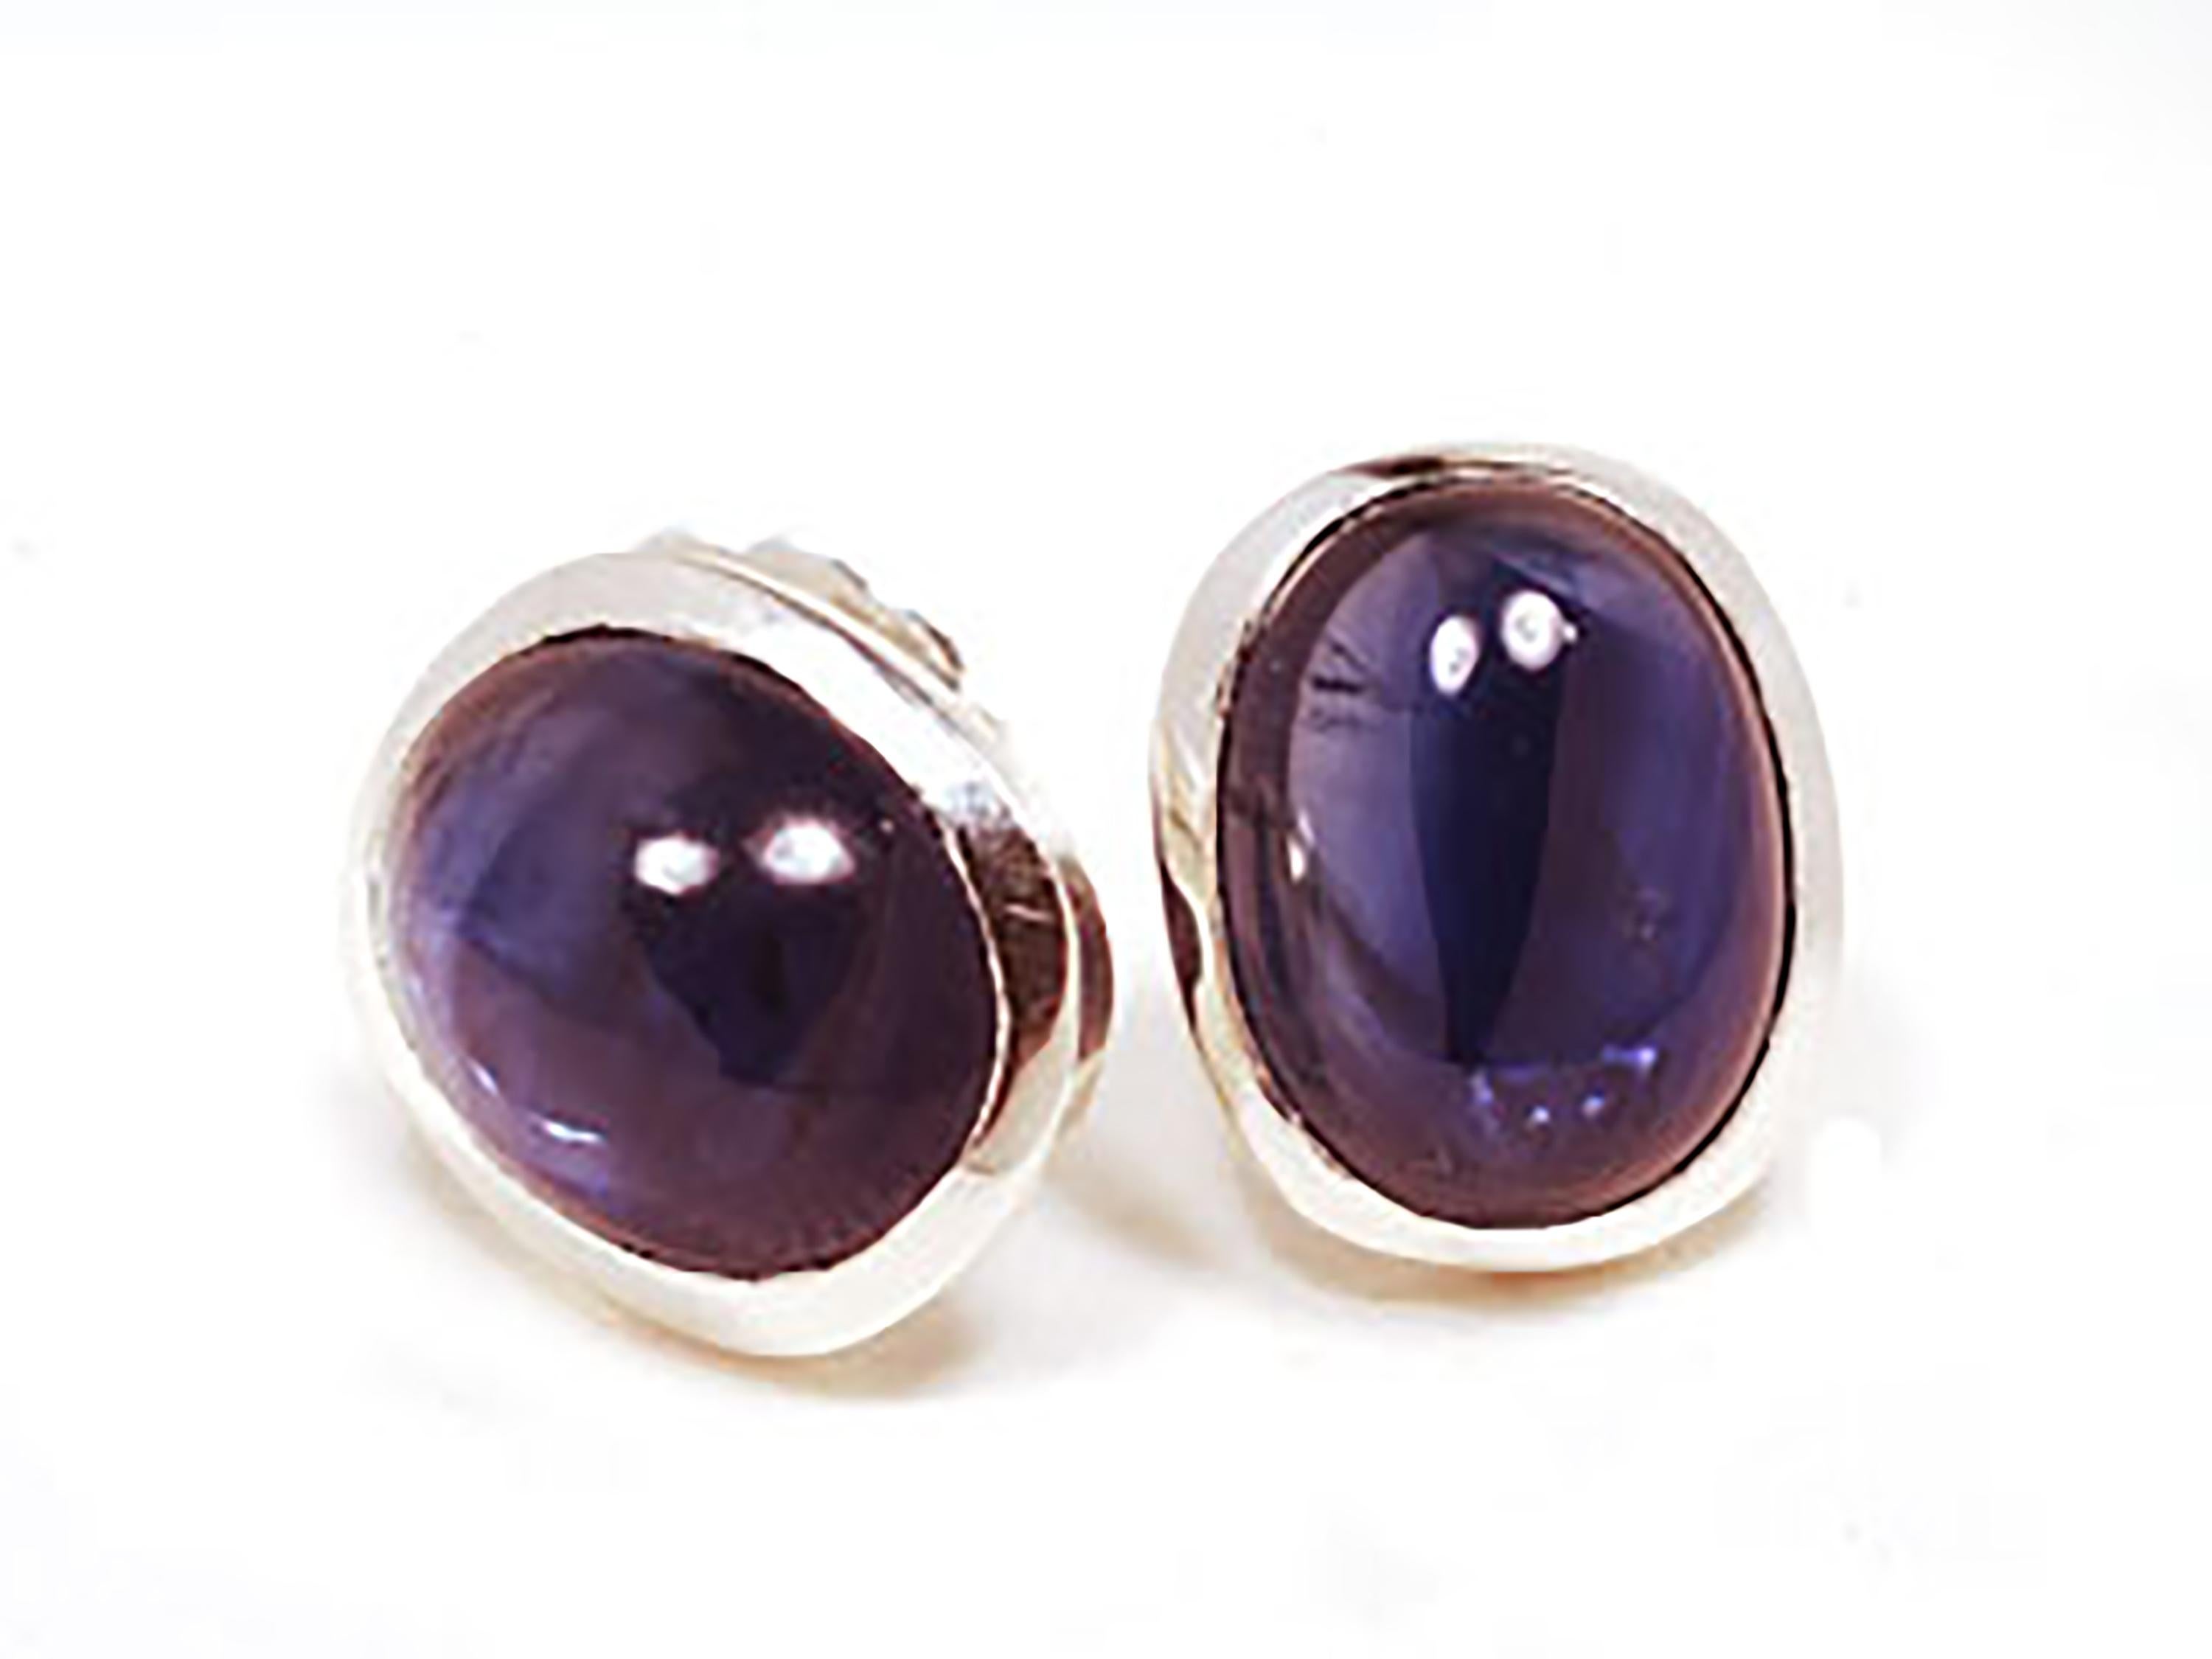 Sterling silver stud earrings
Two perfectly matched genuine oval cabochon sapphires weighing  8.00 carats
Earrings measuring  12x10 millimeter
Cabochon sapphires measuring 10x8 millimeter
New earrings
Handmade in the USA
White gold plated
